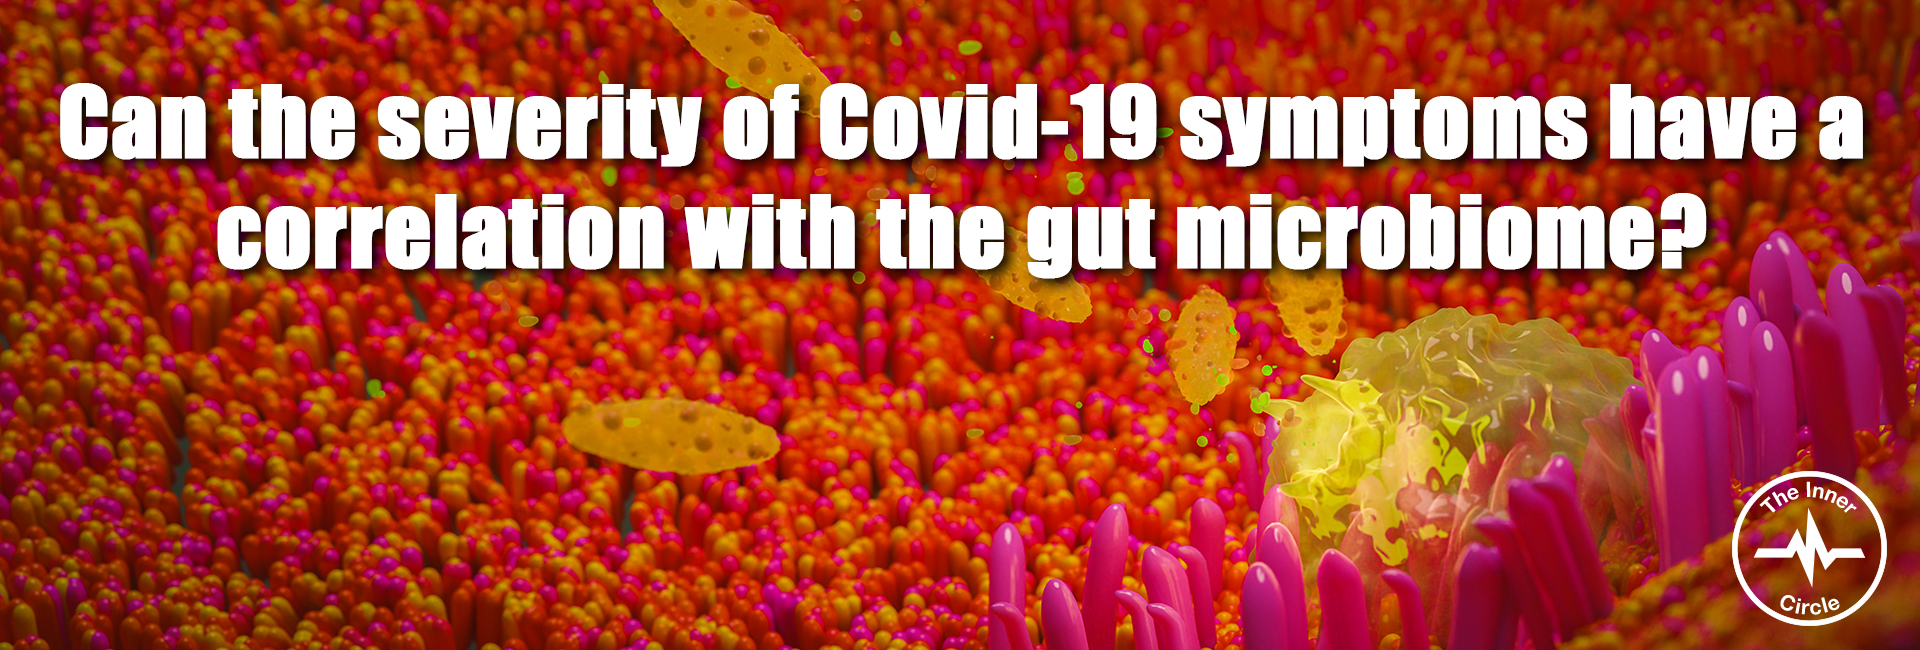 Can the severity of Covid-19 symptoms have a correlation with the gut microbiome?